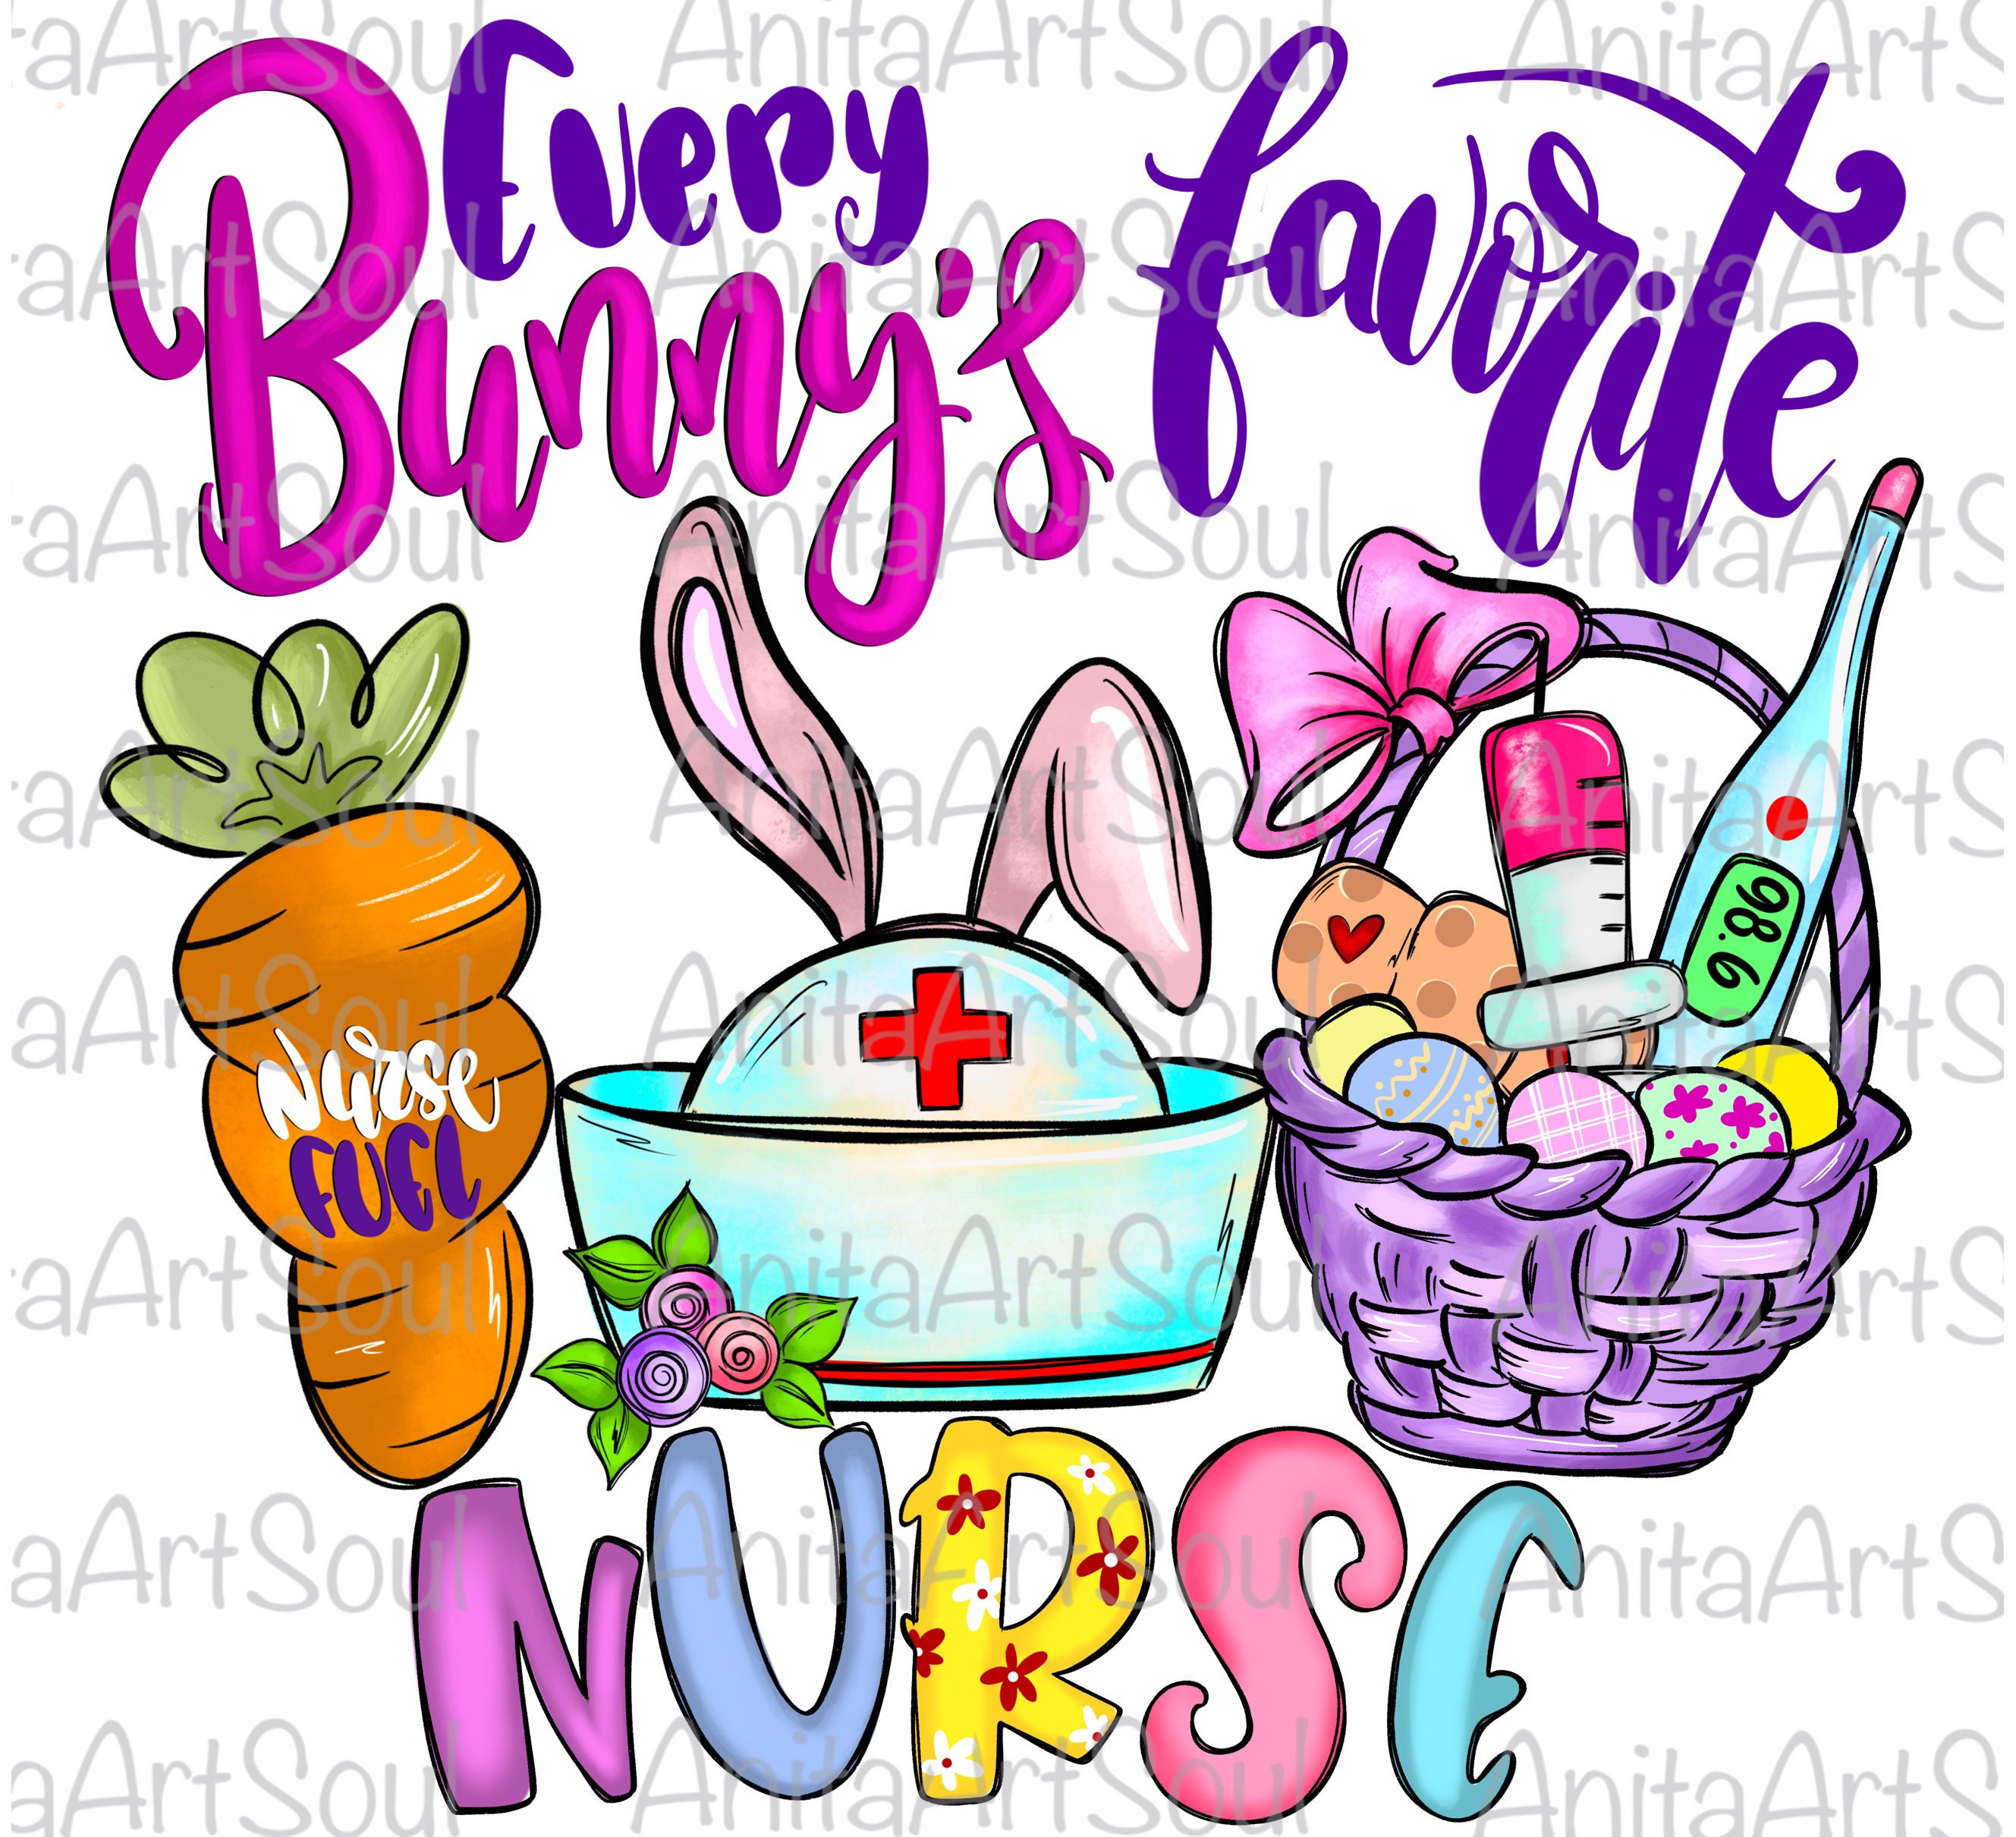 Every Bunny's Favorite PT Sublimation Download Easter physical therapist Instant Download physical therapy pt design